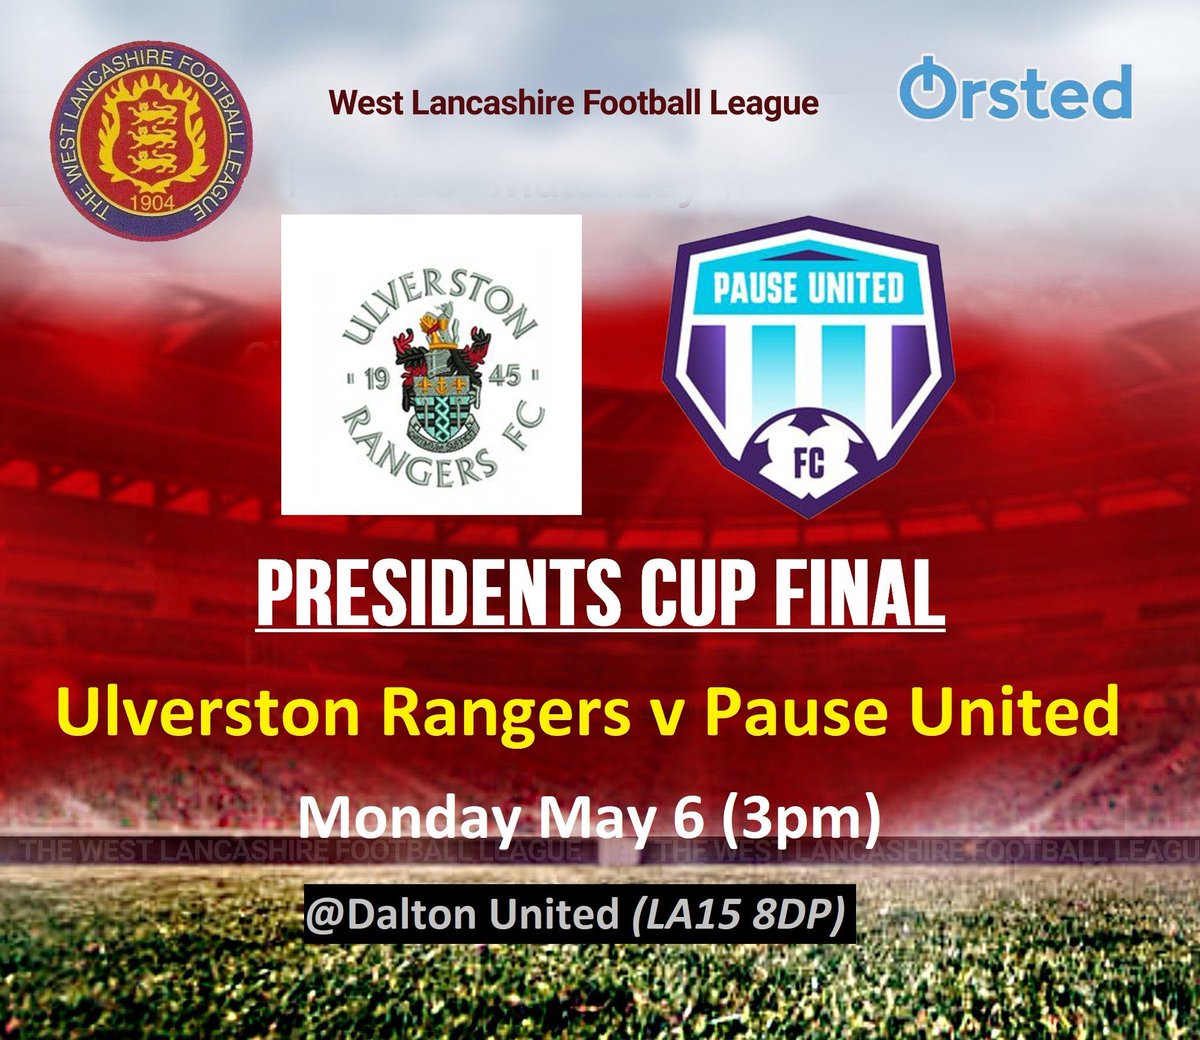 Monday 6th May, we are hosting this on behalf of the West Lancashire League! 🏆𝗣𝗥𝗘𝗦𝗜𝗗𝗘𝗡𝗧𝗦 𝗖𝗨𝗣 𝗙𝗜𝗡𝗔𝗟🏆 Entry is £6 and £3 concessions. @UlvRangers2017 v @PauseUnited 🏟️ Railway Meadow, Sponsored by Joss Engineering